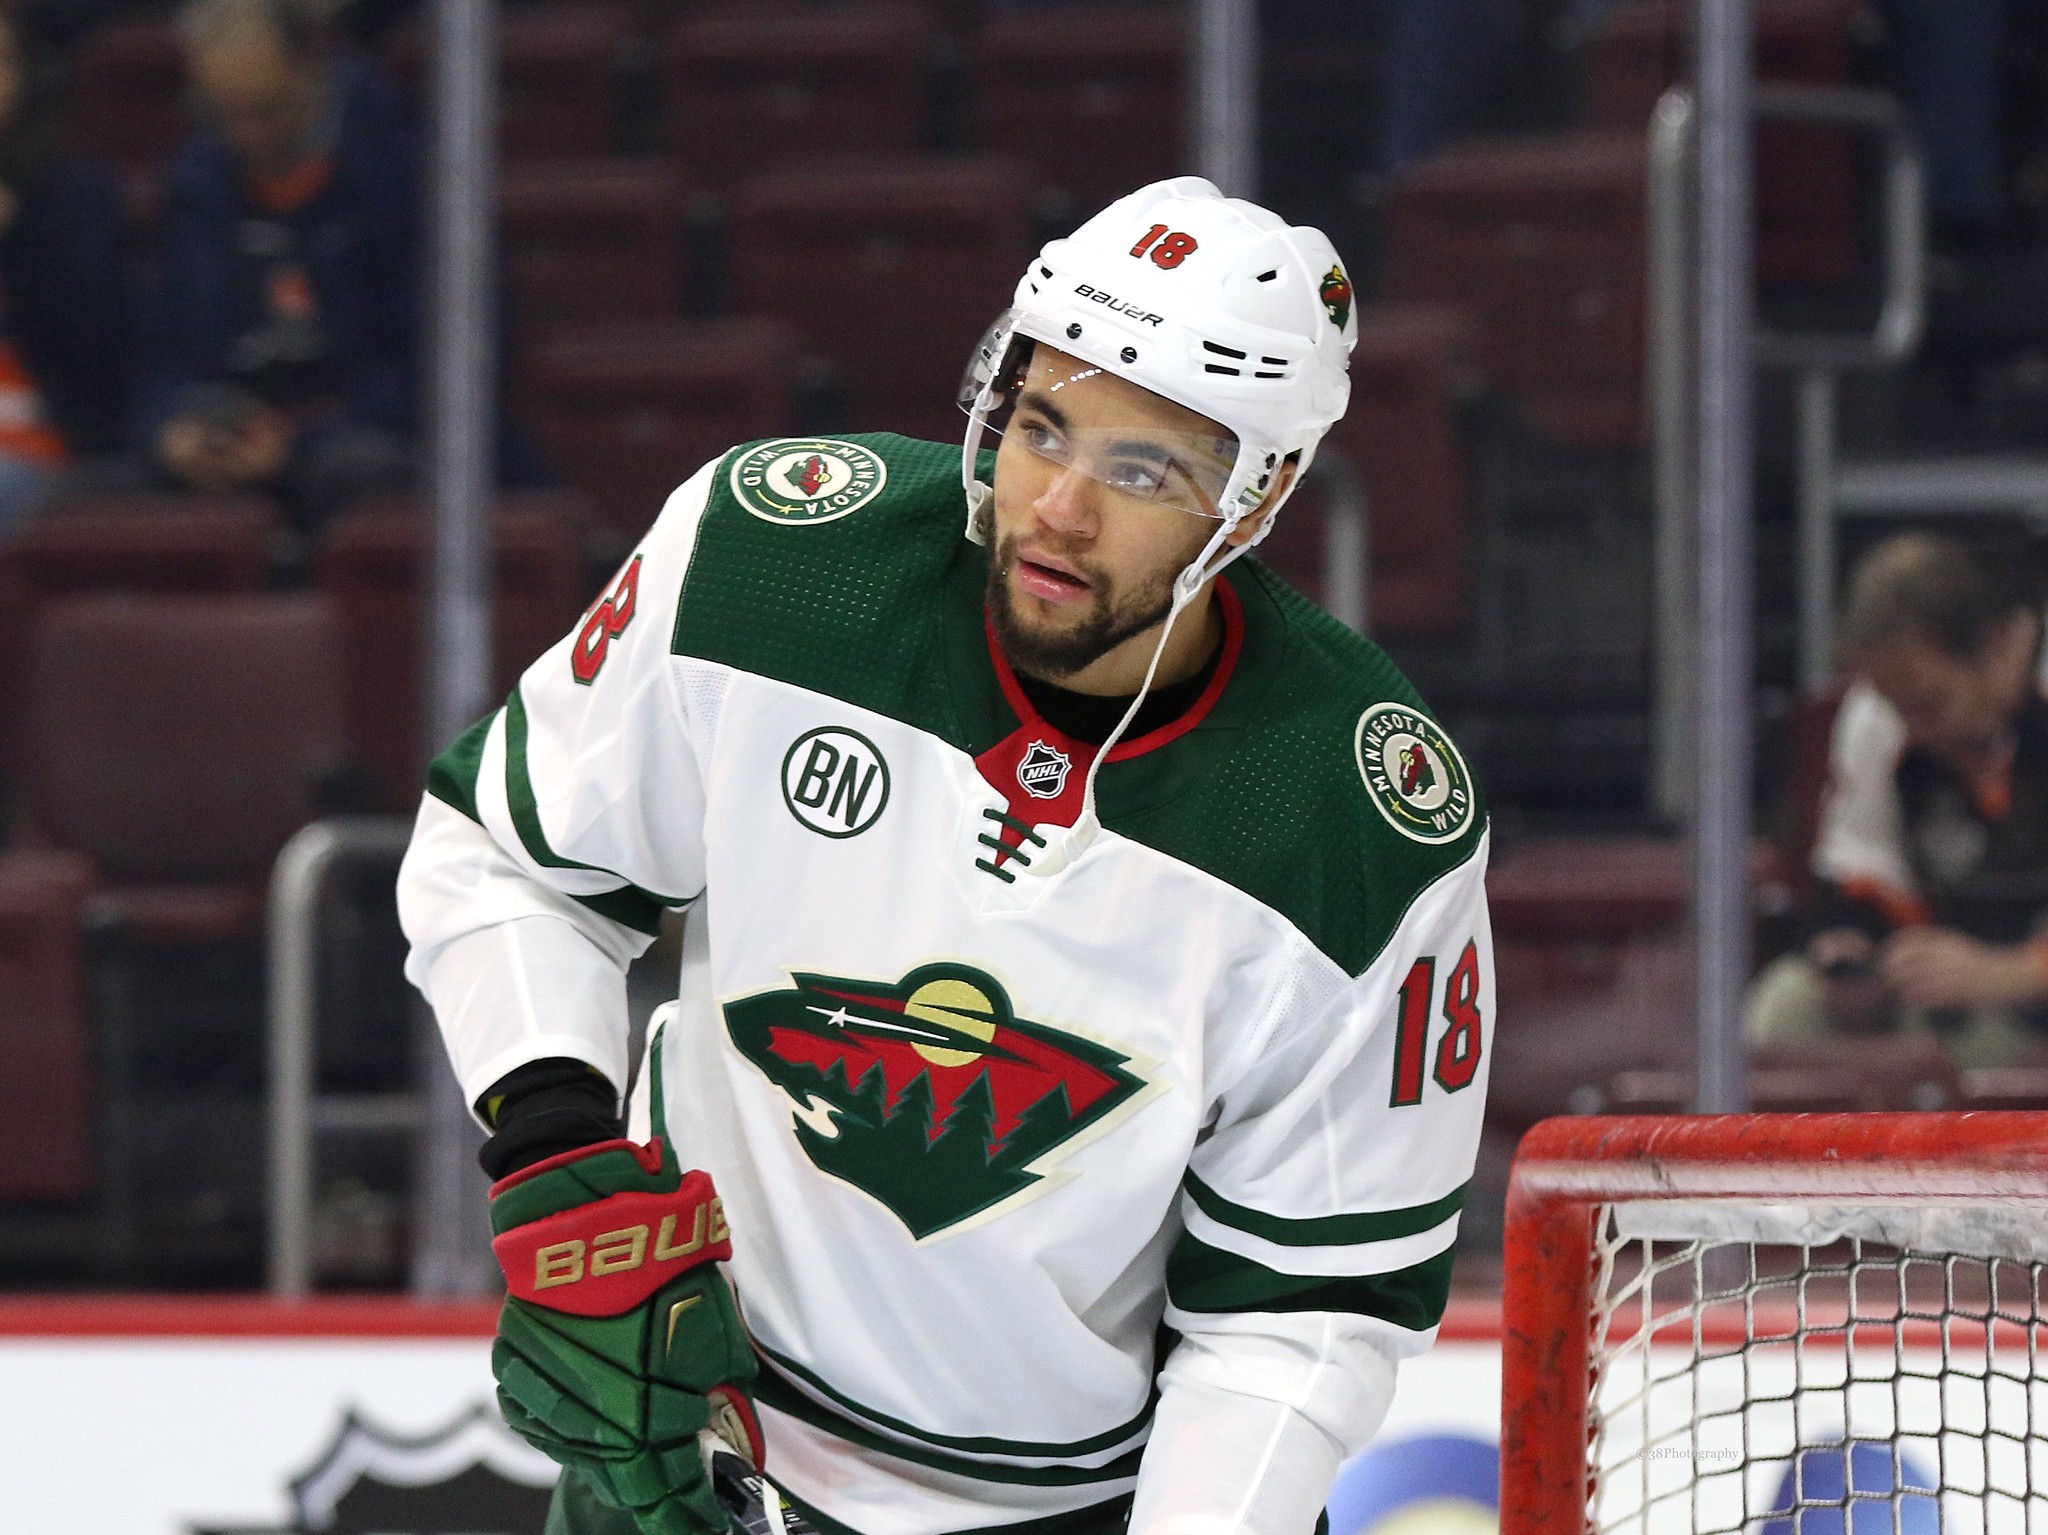 Jordan Greenway could be moved if the Minnesota Wild want to make